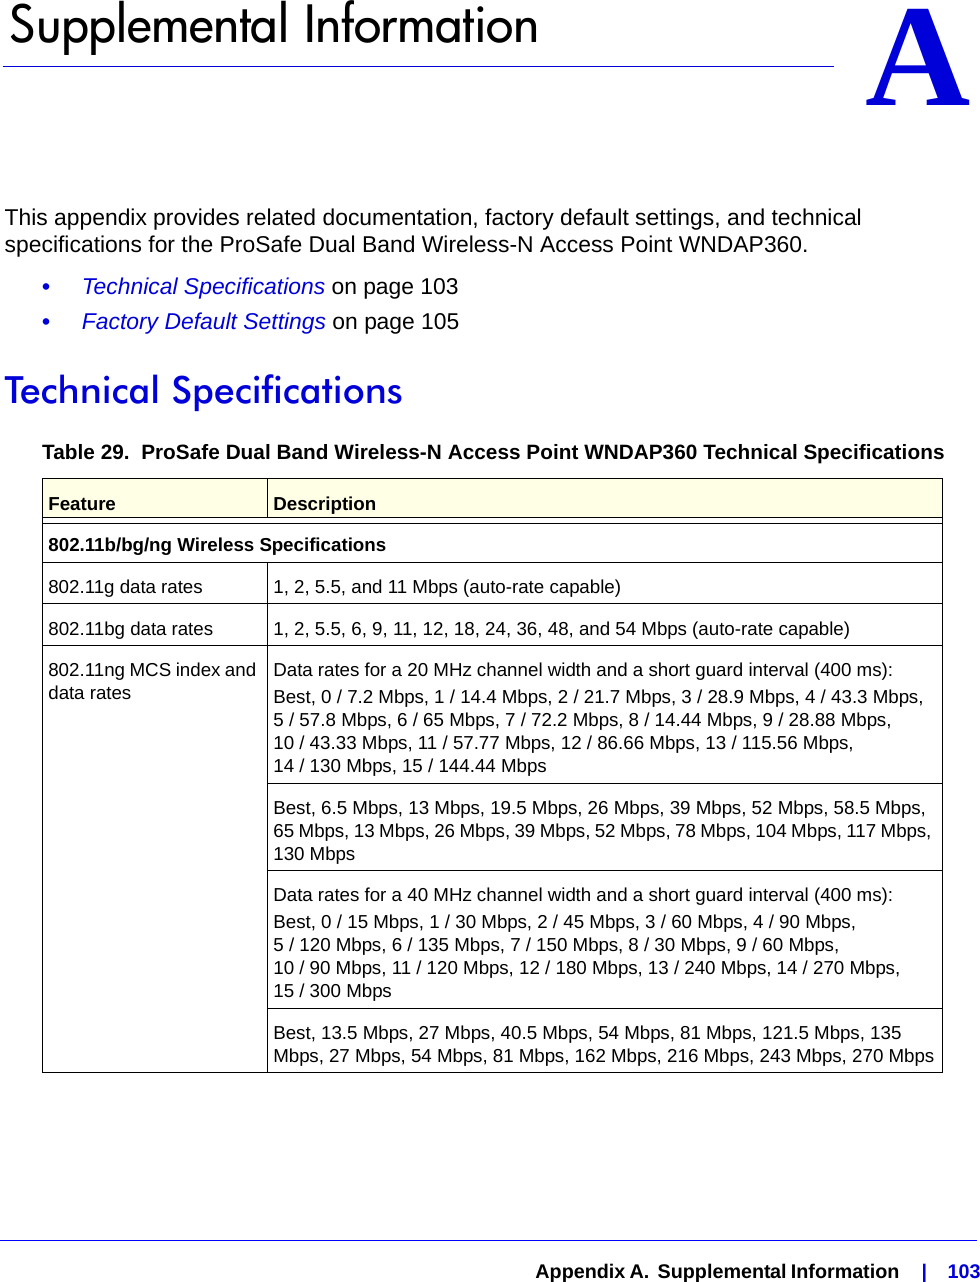   Appendix A.  Supplemental Information    |    103AA.   Supplemental InformationThis appendix provides related documentation, factory default settings, and technical specifications for the ProSafe Dual Band Wireless-N Access Point WNDAP360.•     Technical Specifications on page 103•     Factory Default Settings on page 105Technical SpecificationsTable 29.  ProSafe Dual Band Wireless-N Access Point WNDAP360 Technical SpecificationsFeature Description802.11b/bg/ng Wireless Specifications802.11g data rates 1, 2, 5.5, and 11 Mbps (auto-rate capable)802.11bg data rates 1, 2, 5.5, 6, 9, 11, 12, 18, 24, 36, 48, and 54 Mbps (auto-rate capable)802.11ng MCS index and data rates Data rates for a 20 MHz channel width and a short guard interval (400 ms):Best, 0 / 7.2 Mbps, 1 / 14.4 Mbps, 2 / 21.7 Mbps, 3 / 28.9 Mbps, 4 / 43.3 Mbps, 5 / 57.8 Mbps, 6 / 65 Mbps, 7 / 72.2 Mbps, 8 / 14.44 Mbps, 9 / 28.88 Mbps, 10 / 43.33 Mbps, 11 / 57.77 Mbps, 12 / 86.66 Mbps, 13 / 115.56 Mbps,  14 / 130 Mbps, 15 / 144.44 MbpsBest, 6.5 Mbps, 13 Mbps, 19.5 Mbps, 26 Mbps, 39 Mbps, 52 Mbps, 58.5 Mbps, 65 Mbps, 13 Mbps, 26 Mbps, 39 Mbps, 52 Mbps, 78 Mbps, 104 Mbps, 117 Mbps, 130 MbpsData rates for a 40 MHz channel width and a short guard interval (400 ms):Best, 0 / 15 Mbps, 1 / 30 Mbps, 2 / 45 Mbps, 3 / 60 Mbps, 4 / 90 Mbps, 5 / 120 Mbps, 6 / 135 Mbps, 7 / 150 Mbps, 8 / 30 Mbps, 9 / 60 Mbps, 10 / 90 Mbps, 11 / 120 Mbps, 12 / 180 Mbps, 13 / 240 Mbps, 14 / 270 Mbps, 15 / 300 MbpsBest, 13.5 Mbps, 27 Mbps, 40.5 Mbps, 54 Mbps, 81 Mbps, 121.5 Mbps, 135 Mbps, 27 Mbps, 54 Mbps, 81 Mbps, 162 Mbps, 216 Mbps, 243 Mbps, 270 Mbps